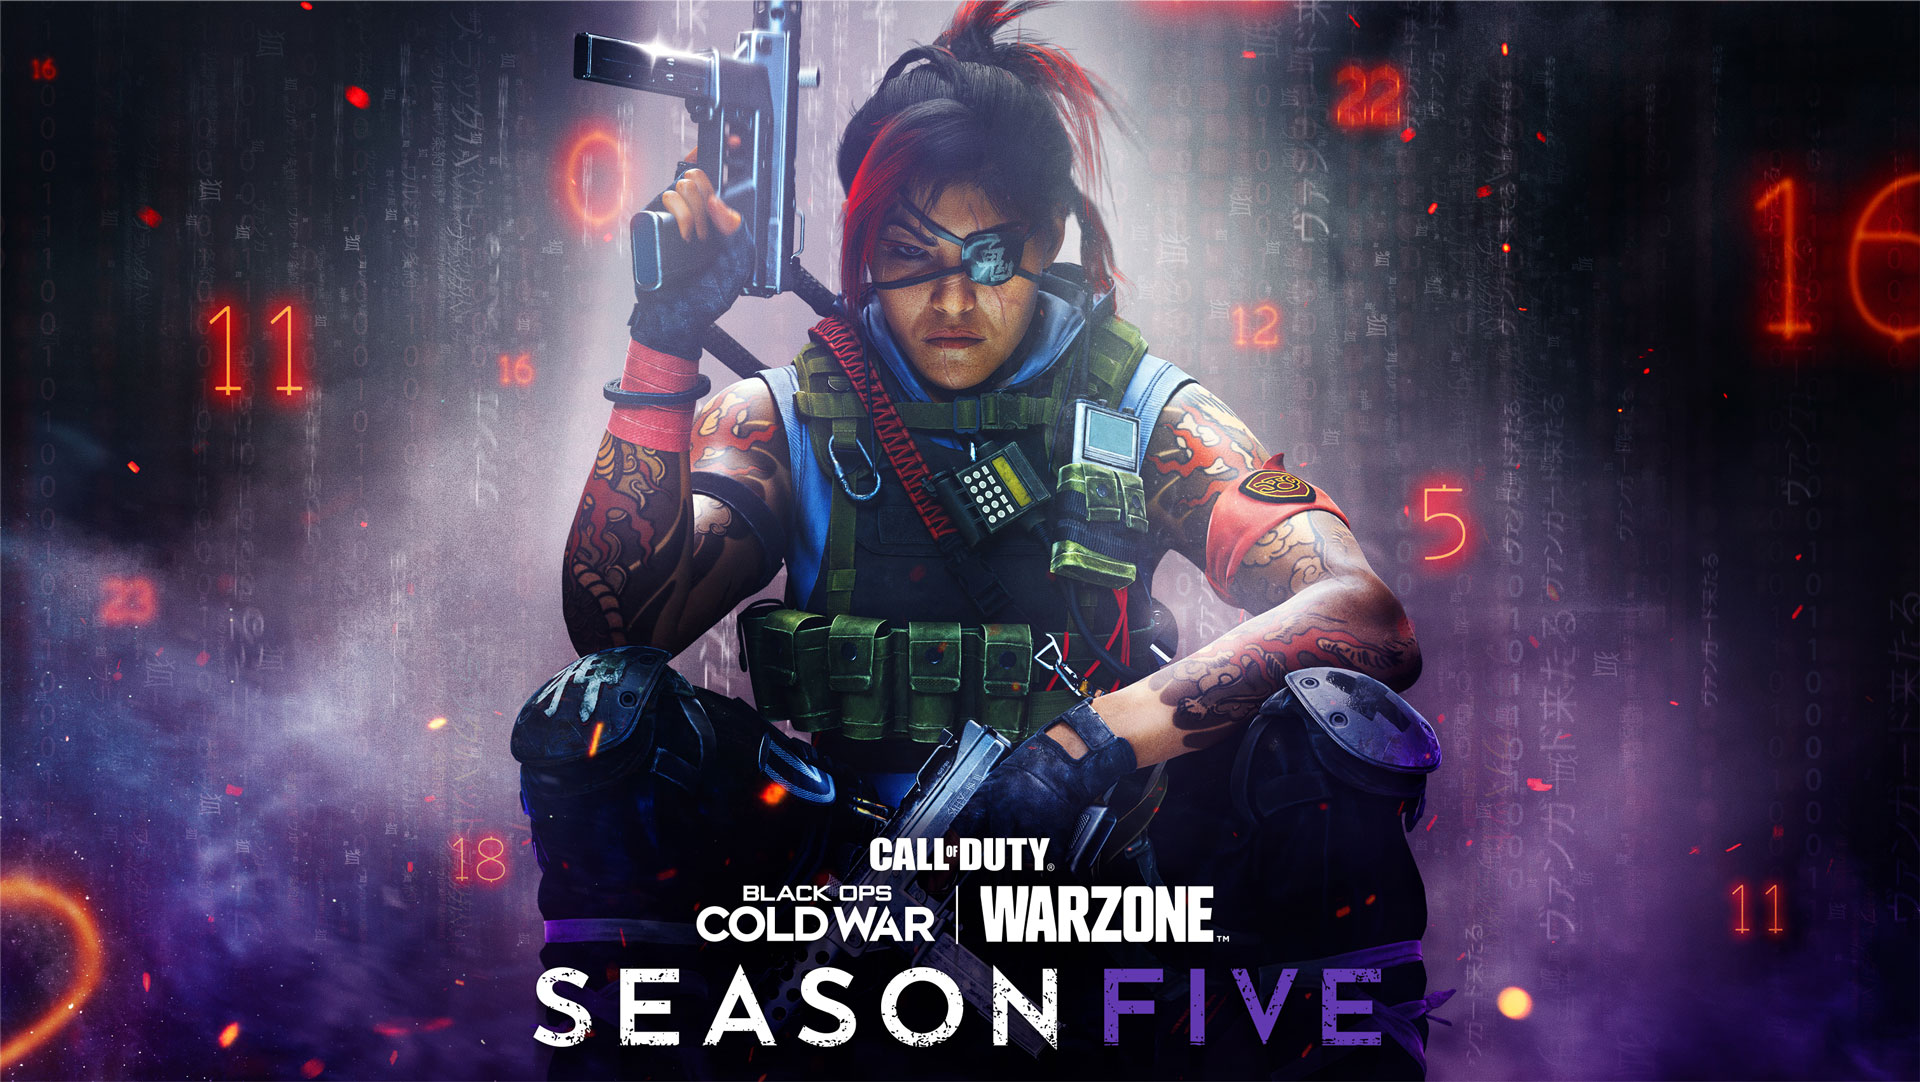 Season Five of Black Ops Cold War and Warzone launches August 12